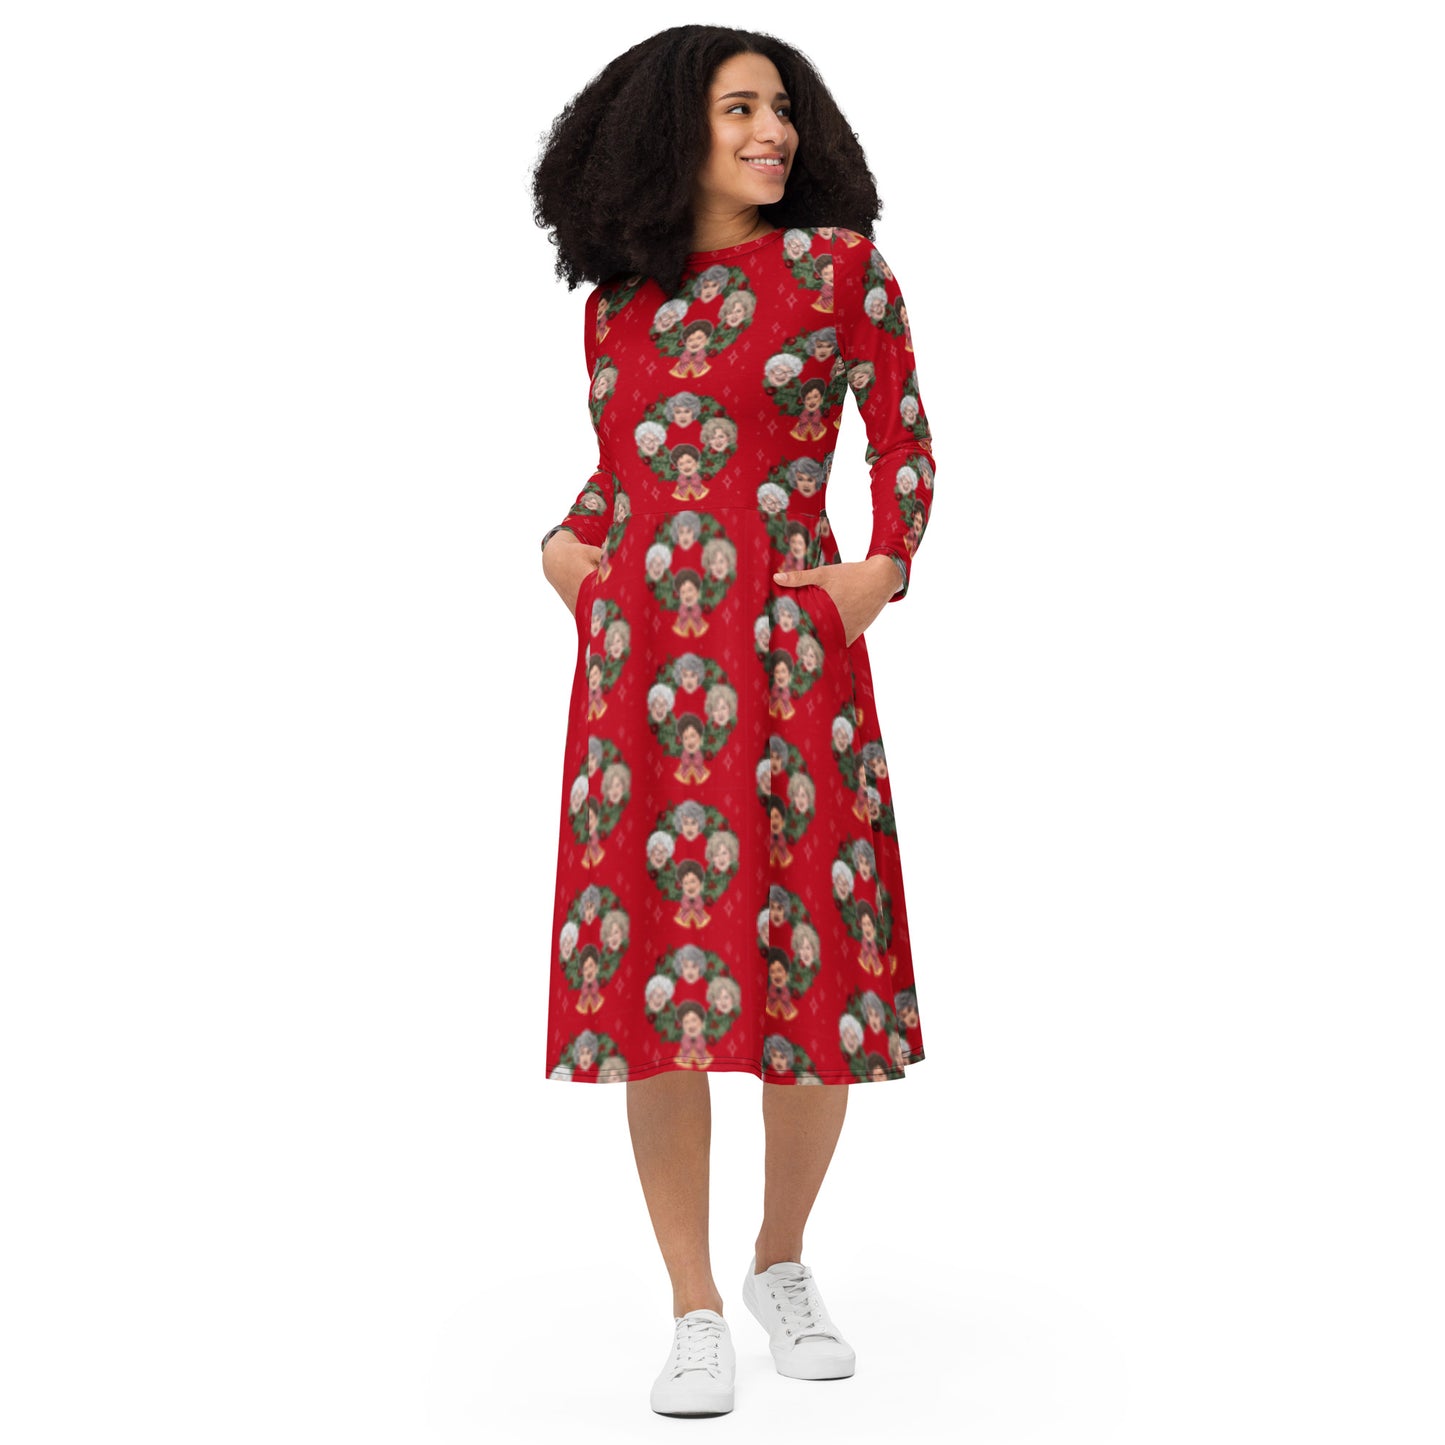 "The Merry in Miami" All-over print long sleeve midi dress